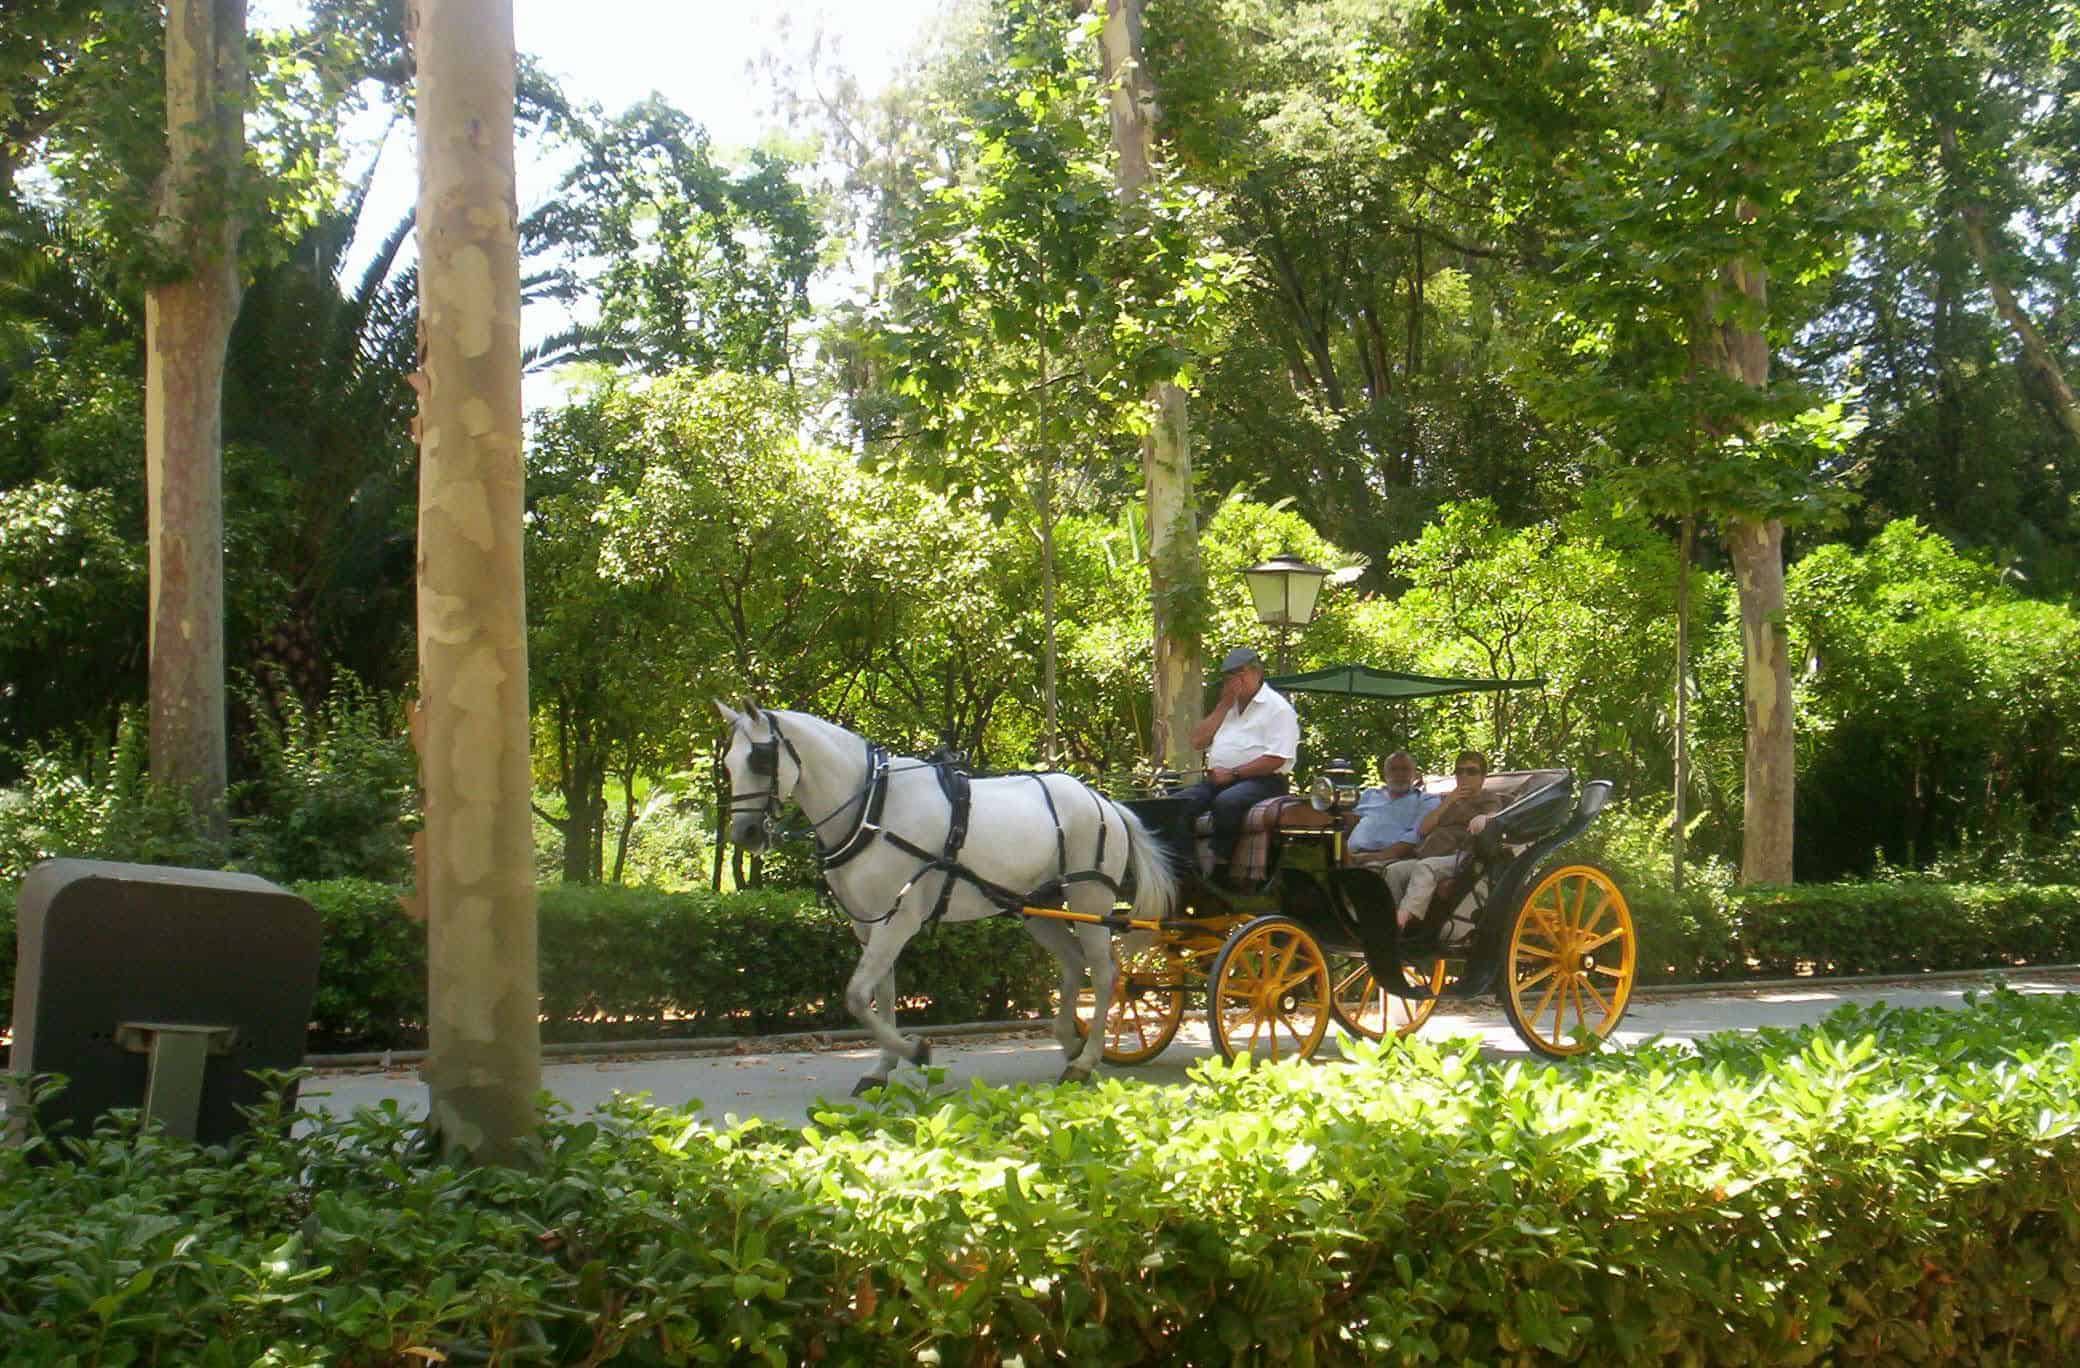 Horses draw visitors up the sandy paths in a city park in Seville.